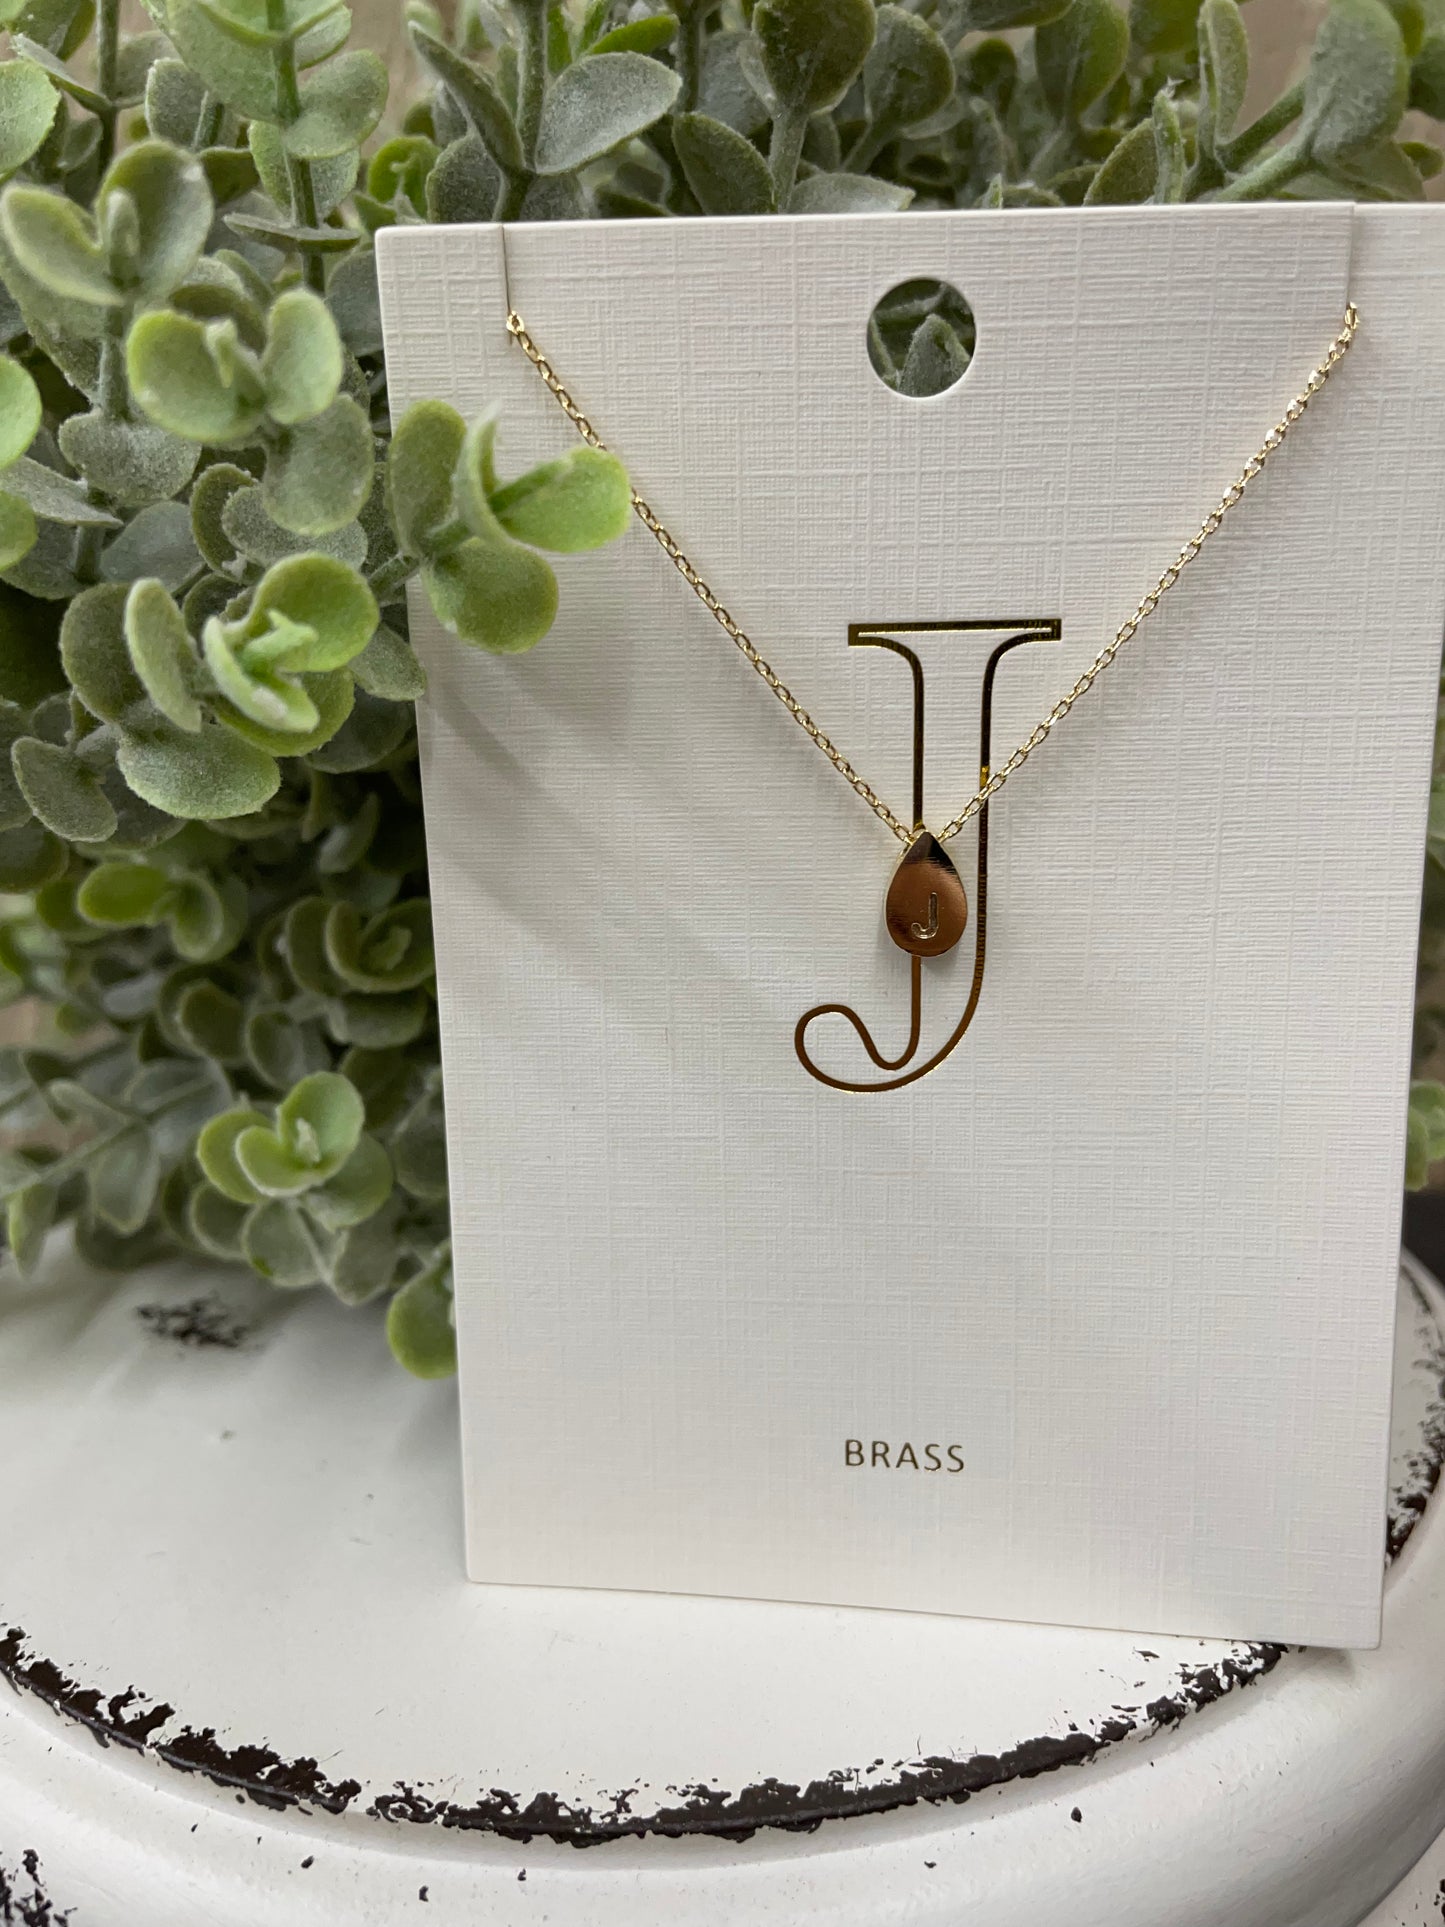 The Teardrop Initial Necklace